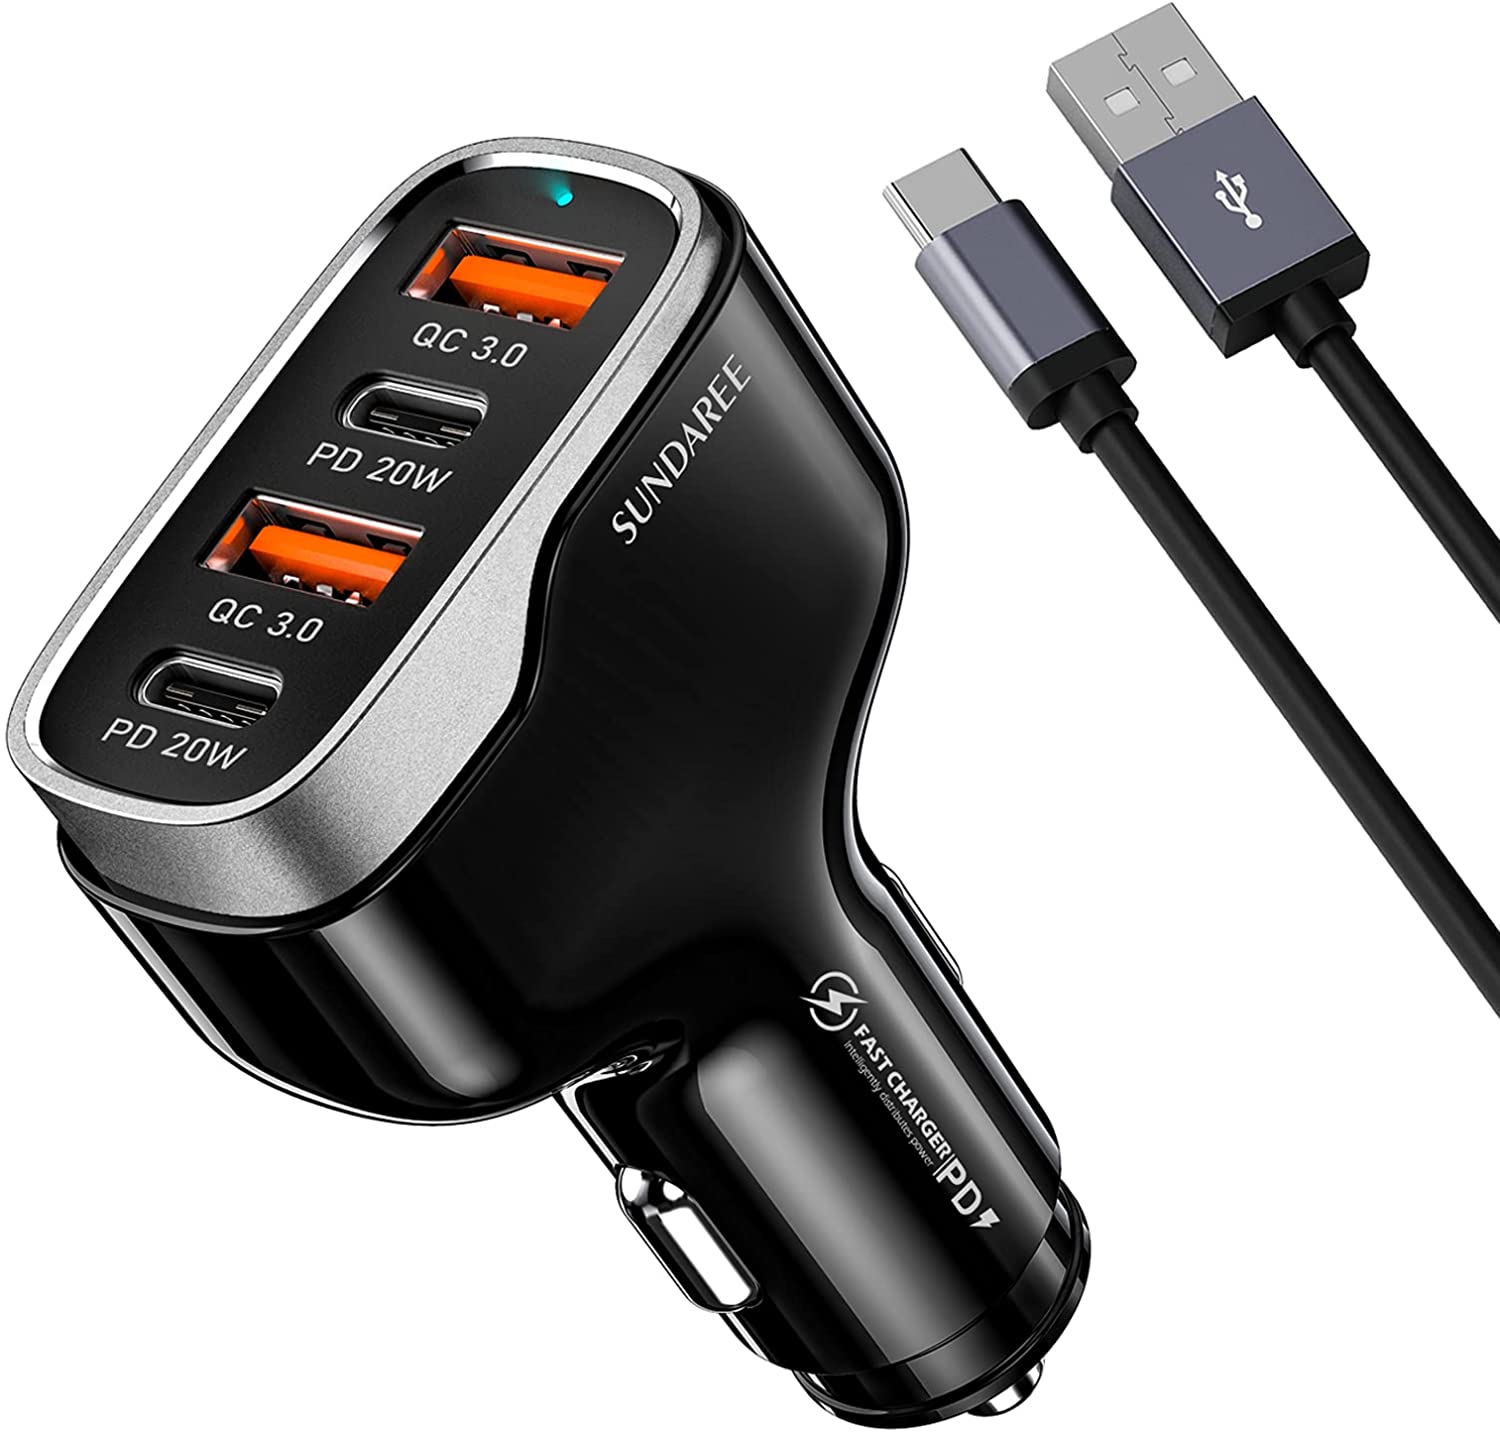 Original car charger with 4 USB